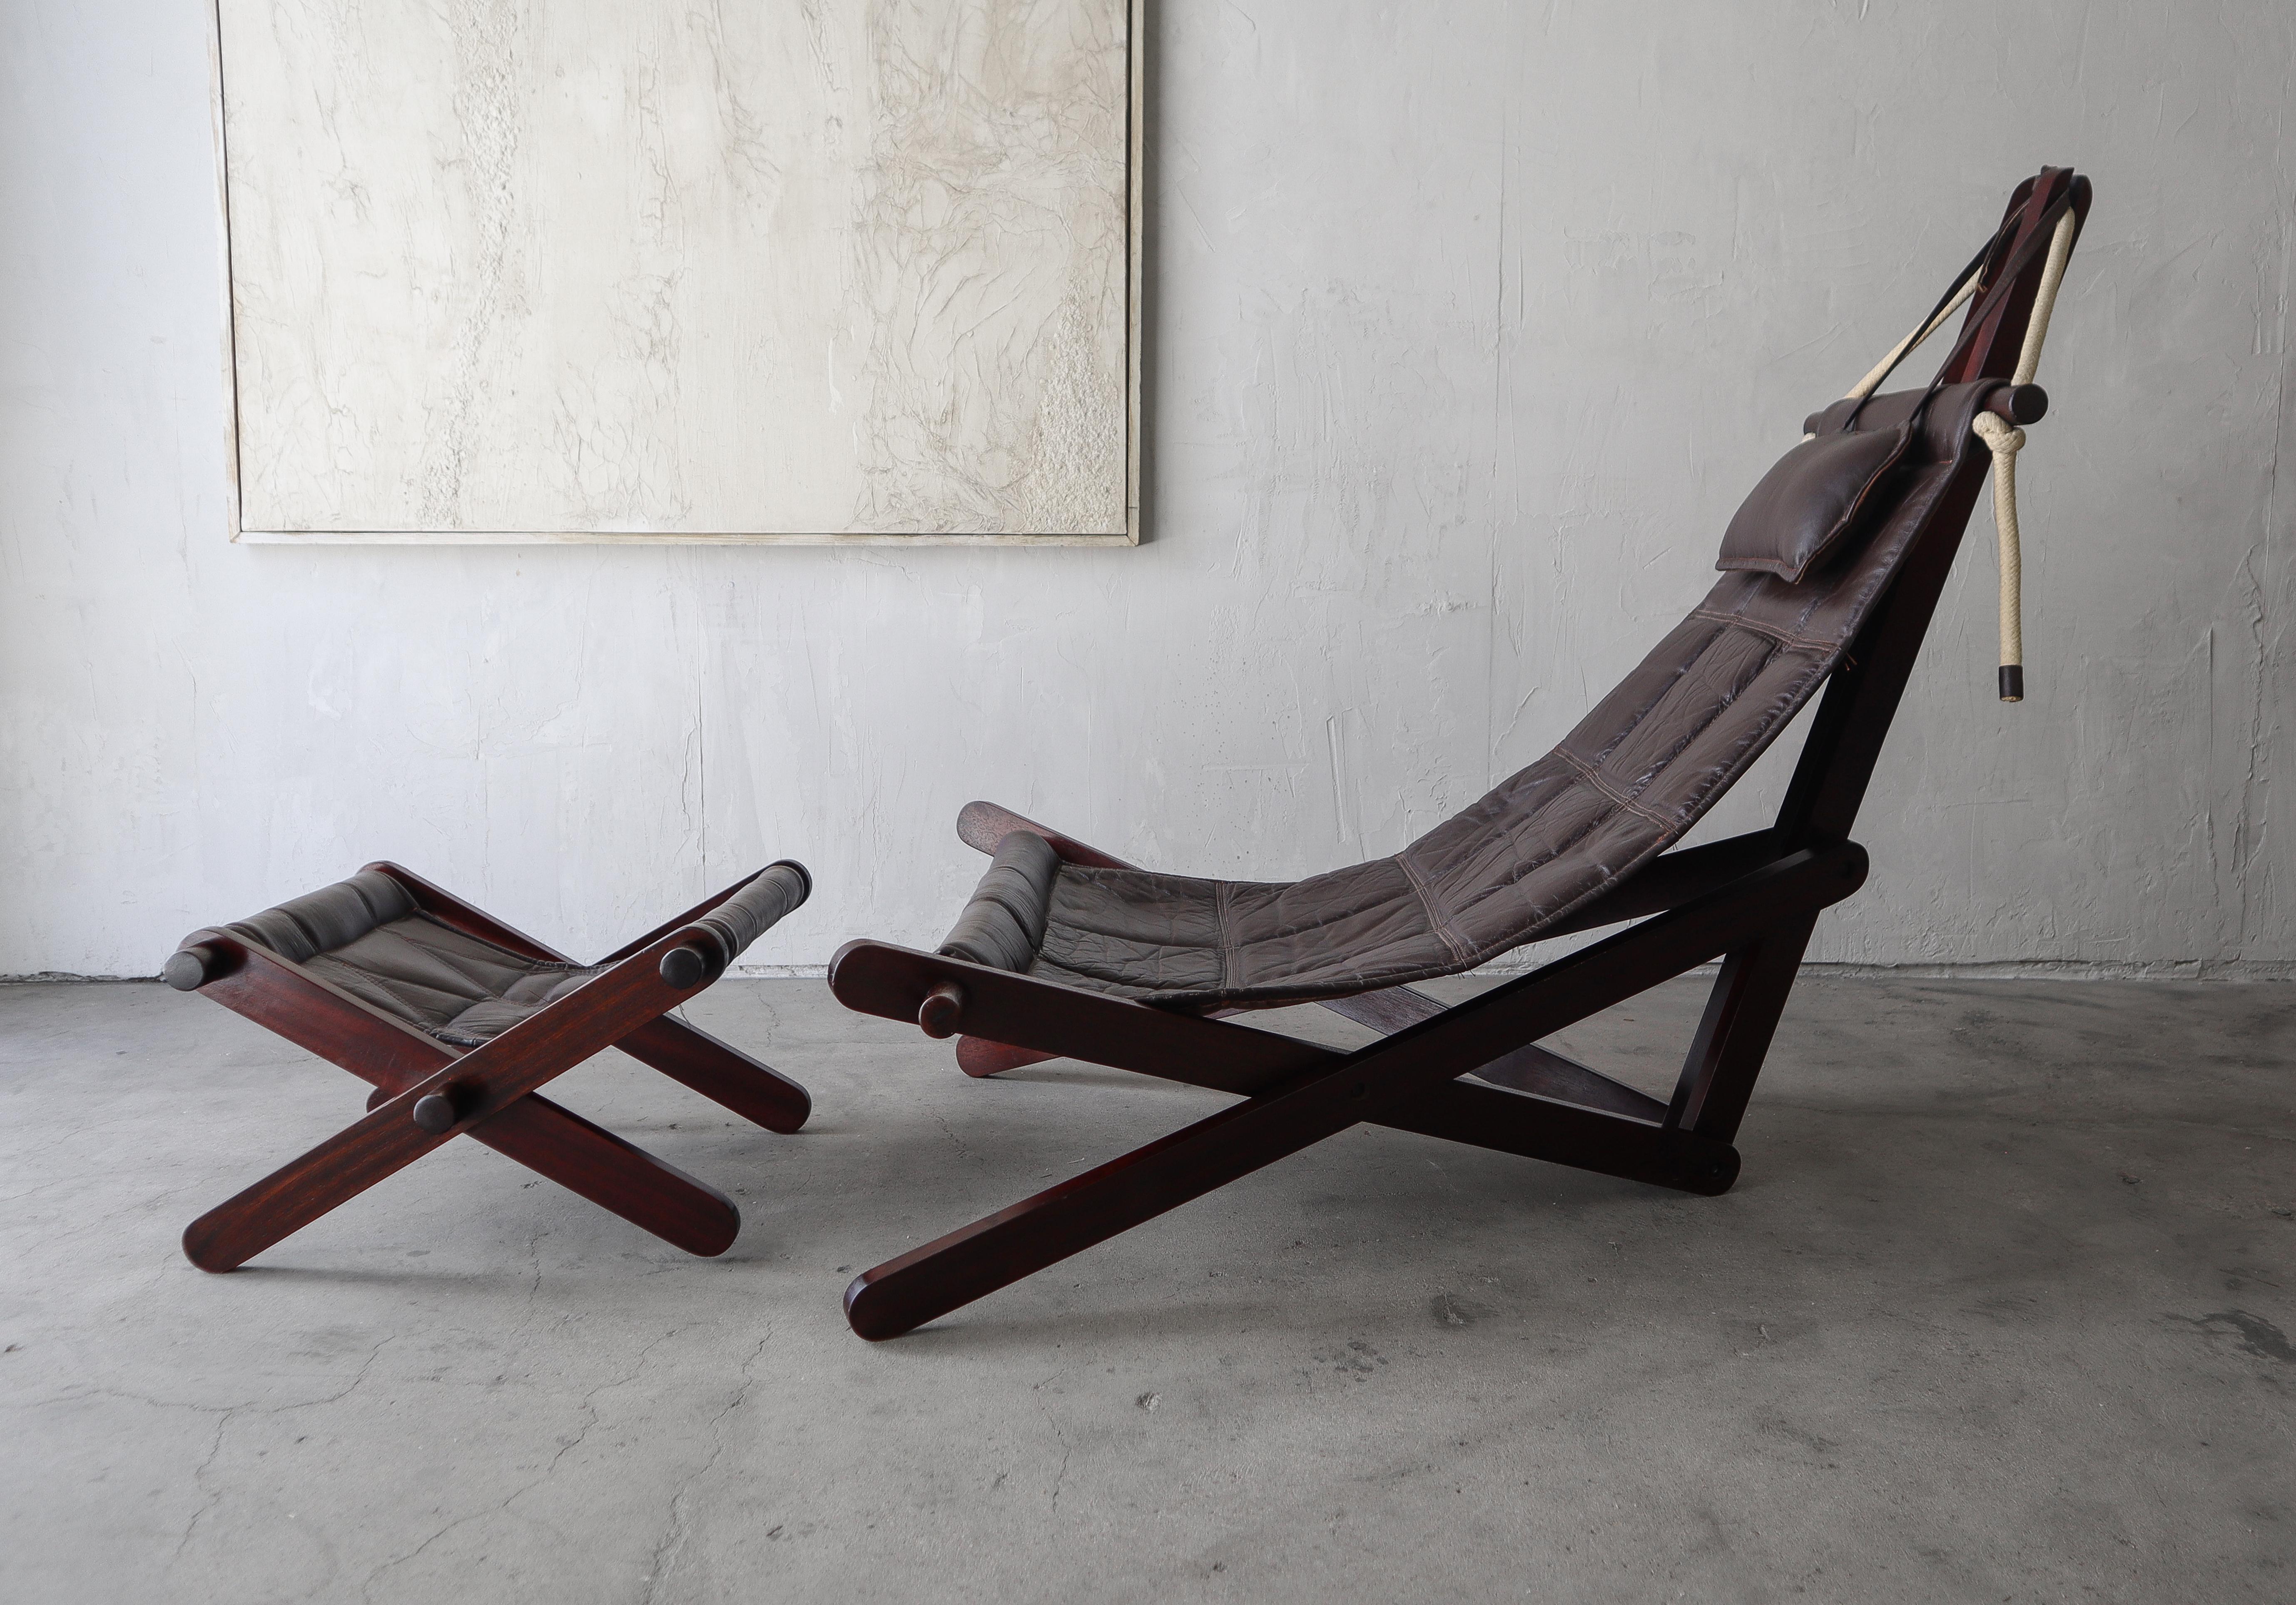 Unique Leather Sling Chair and RARELY seen ottoman, designed by British architect Dominic Michaelis for Moveis Corazza, Brazil.  Piece is constructed of Jatoba (Brazilian Cherrywood), with leather slings and rope details.

Chair and ottoman are in